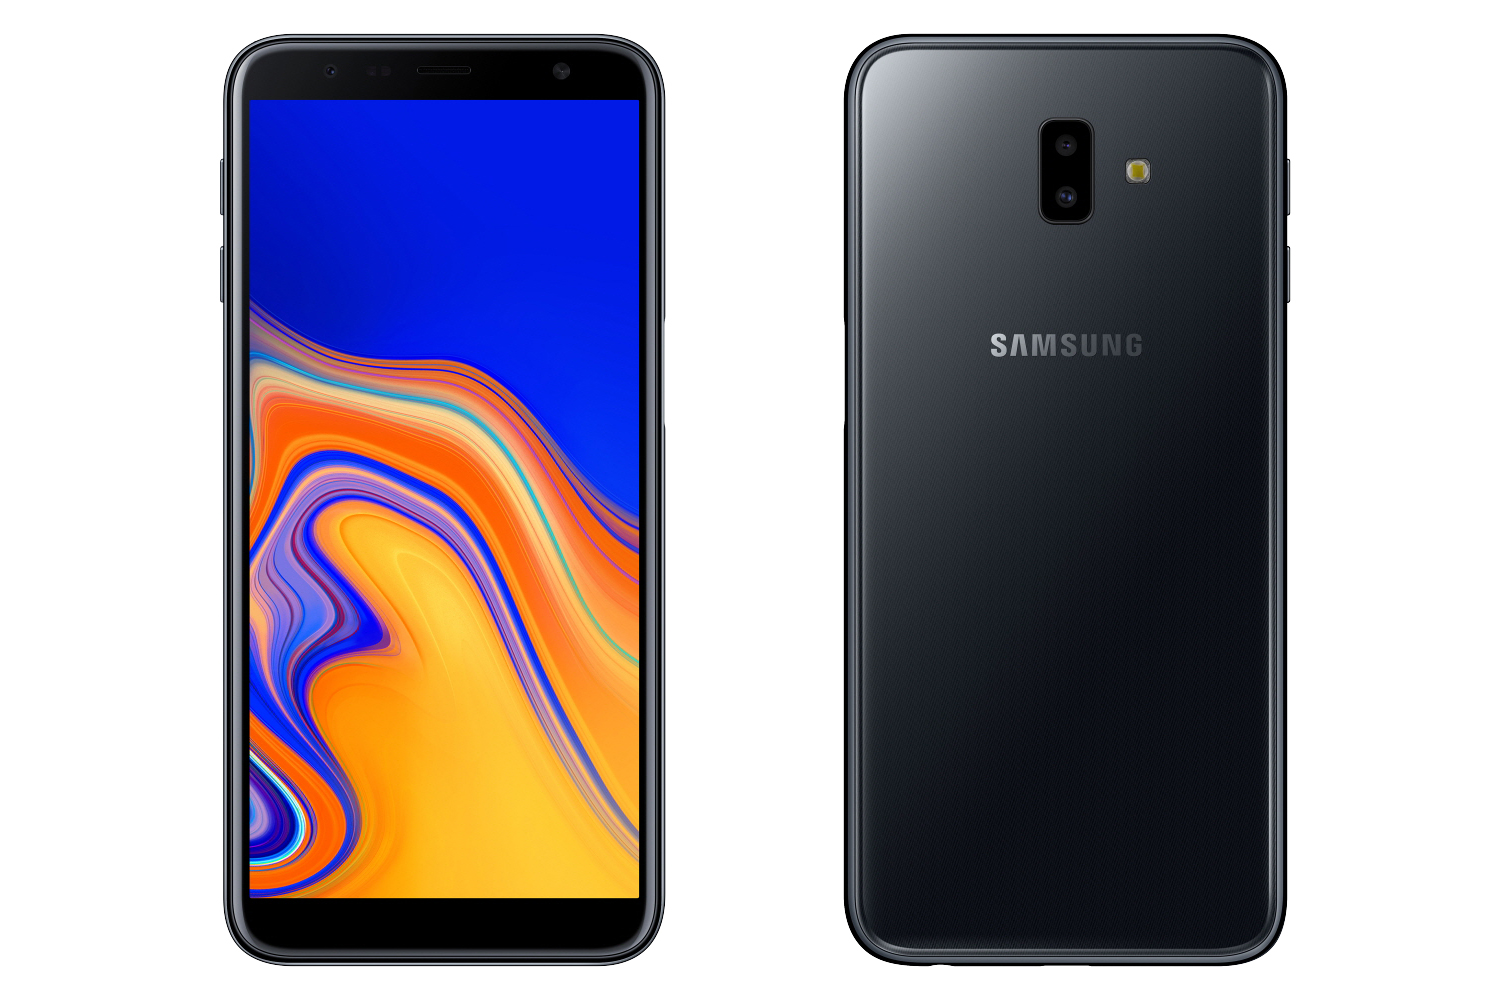 The front and back of a Samsung Galaxy J6 Plus.